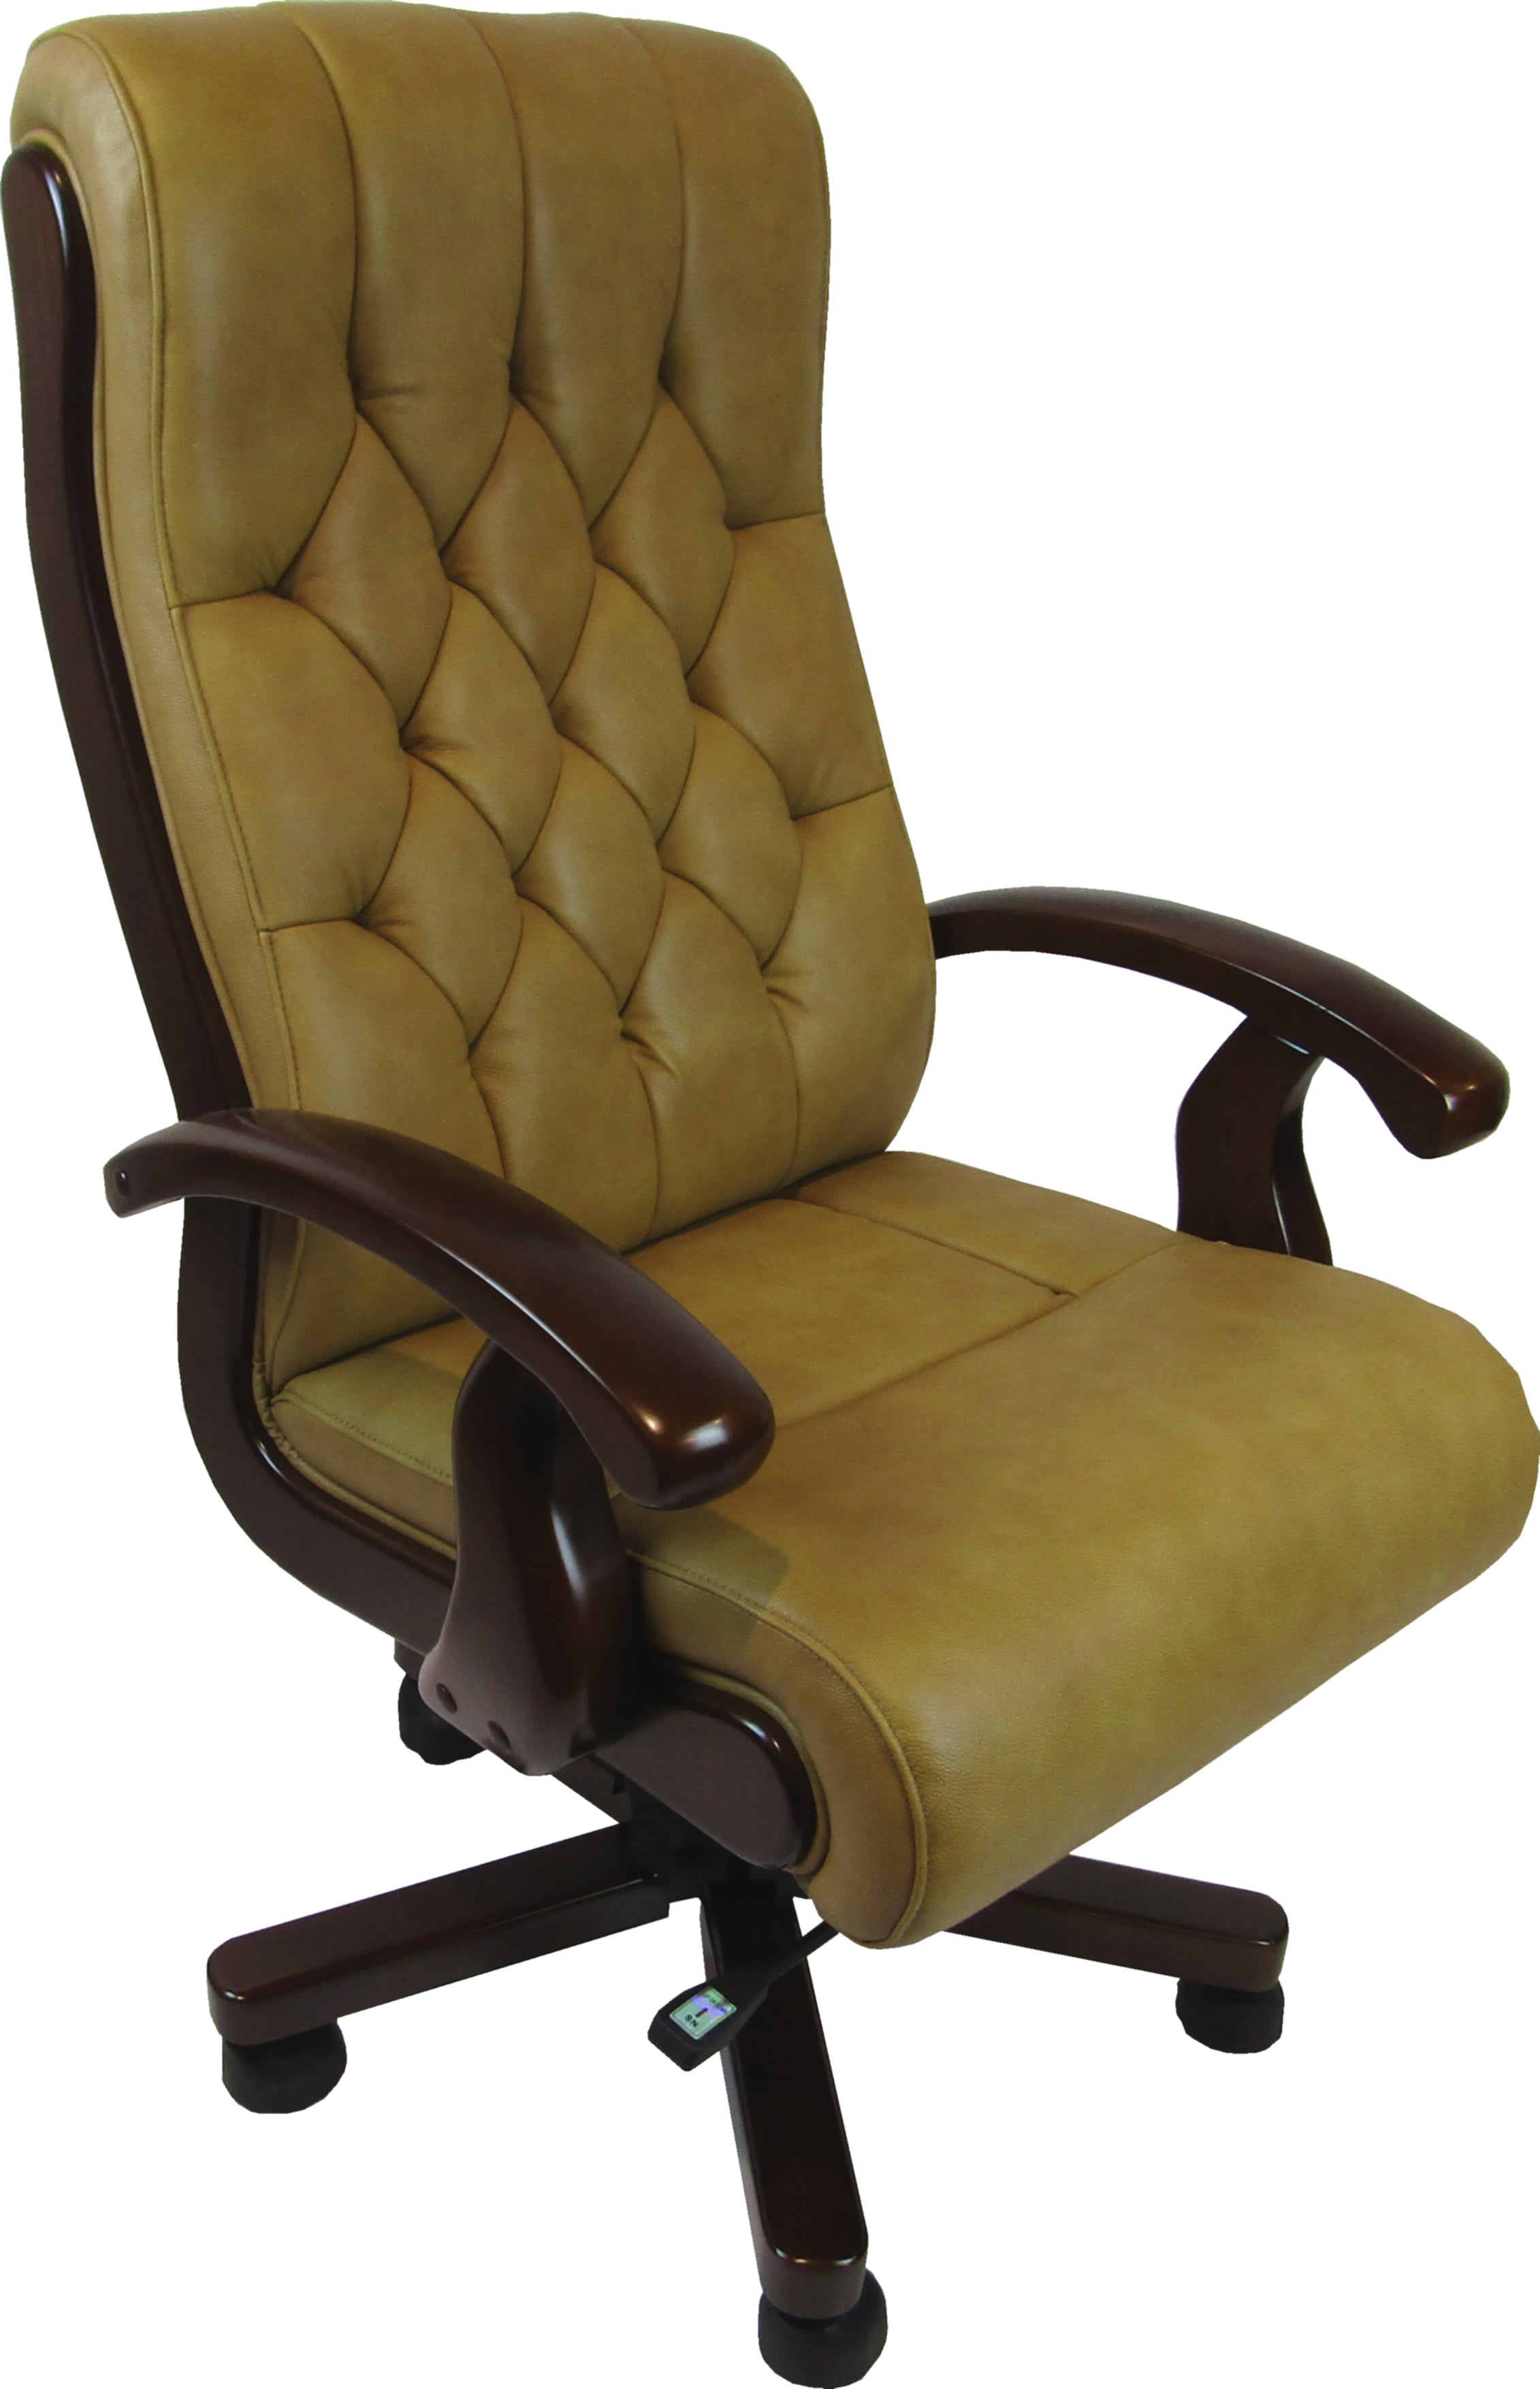 Beige Leather Chesterfield Executive Office Chair - CHA-WS-917 Huddersfield